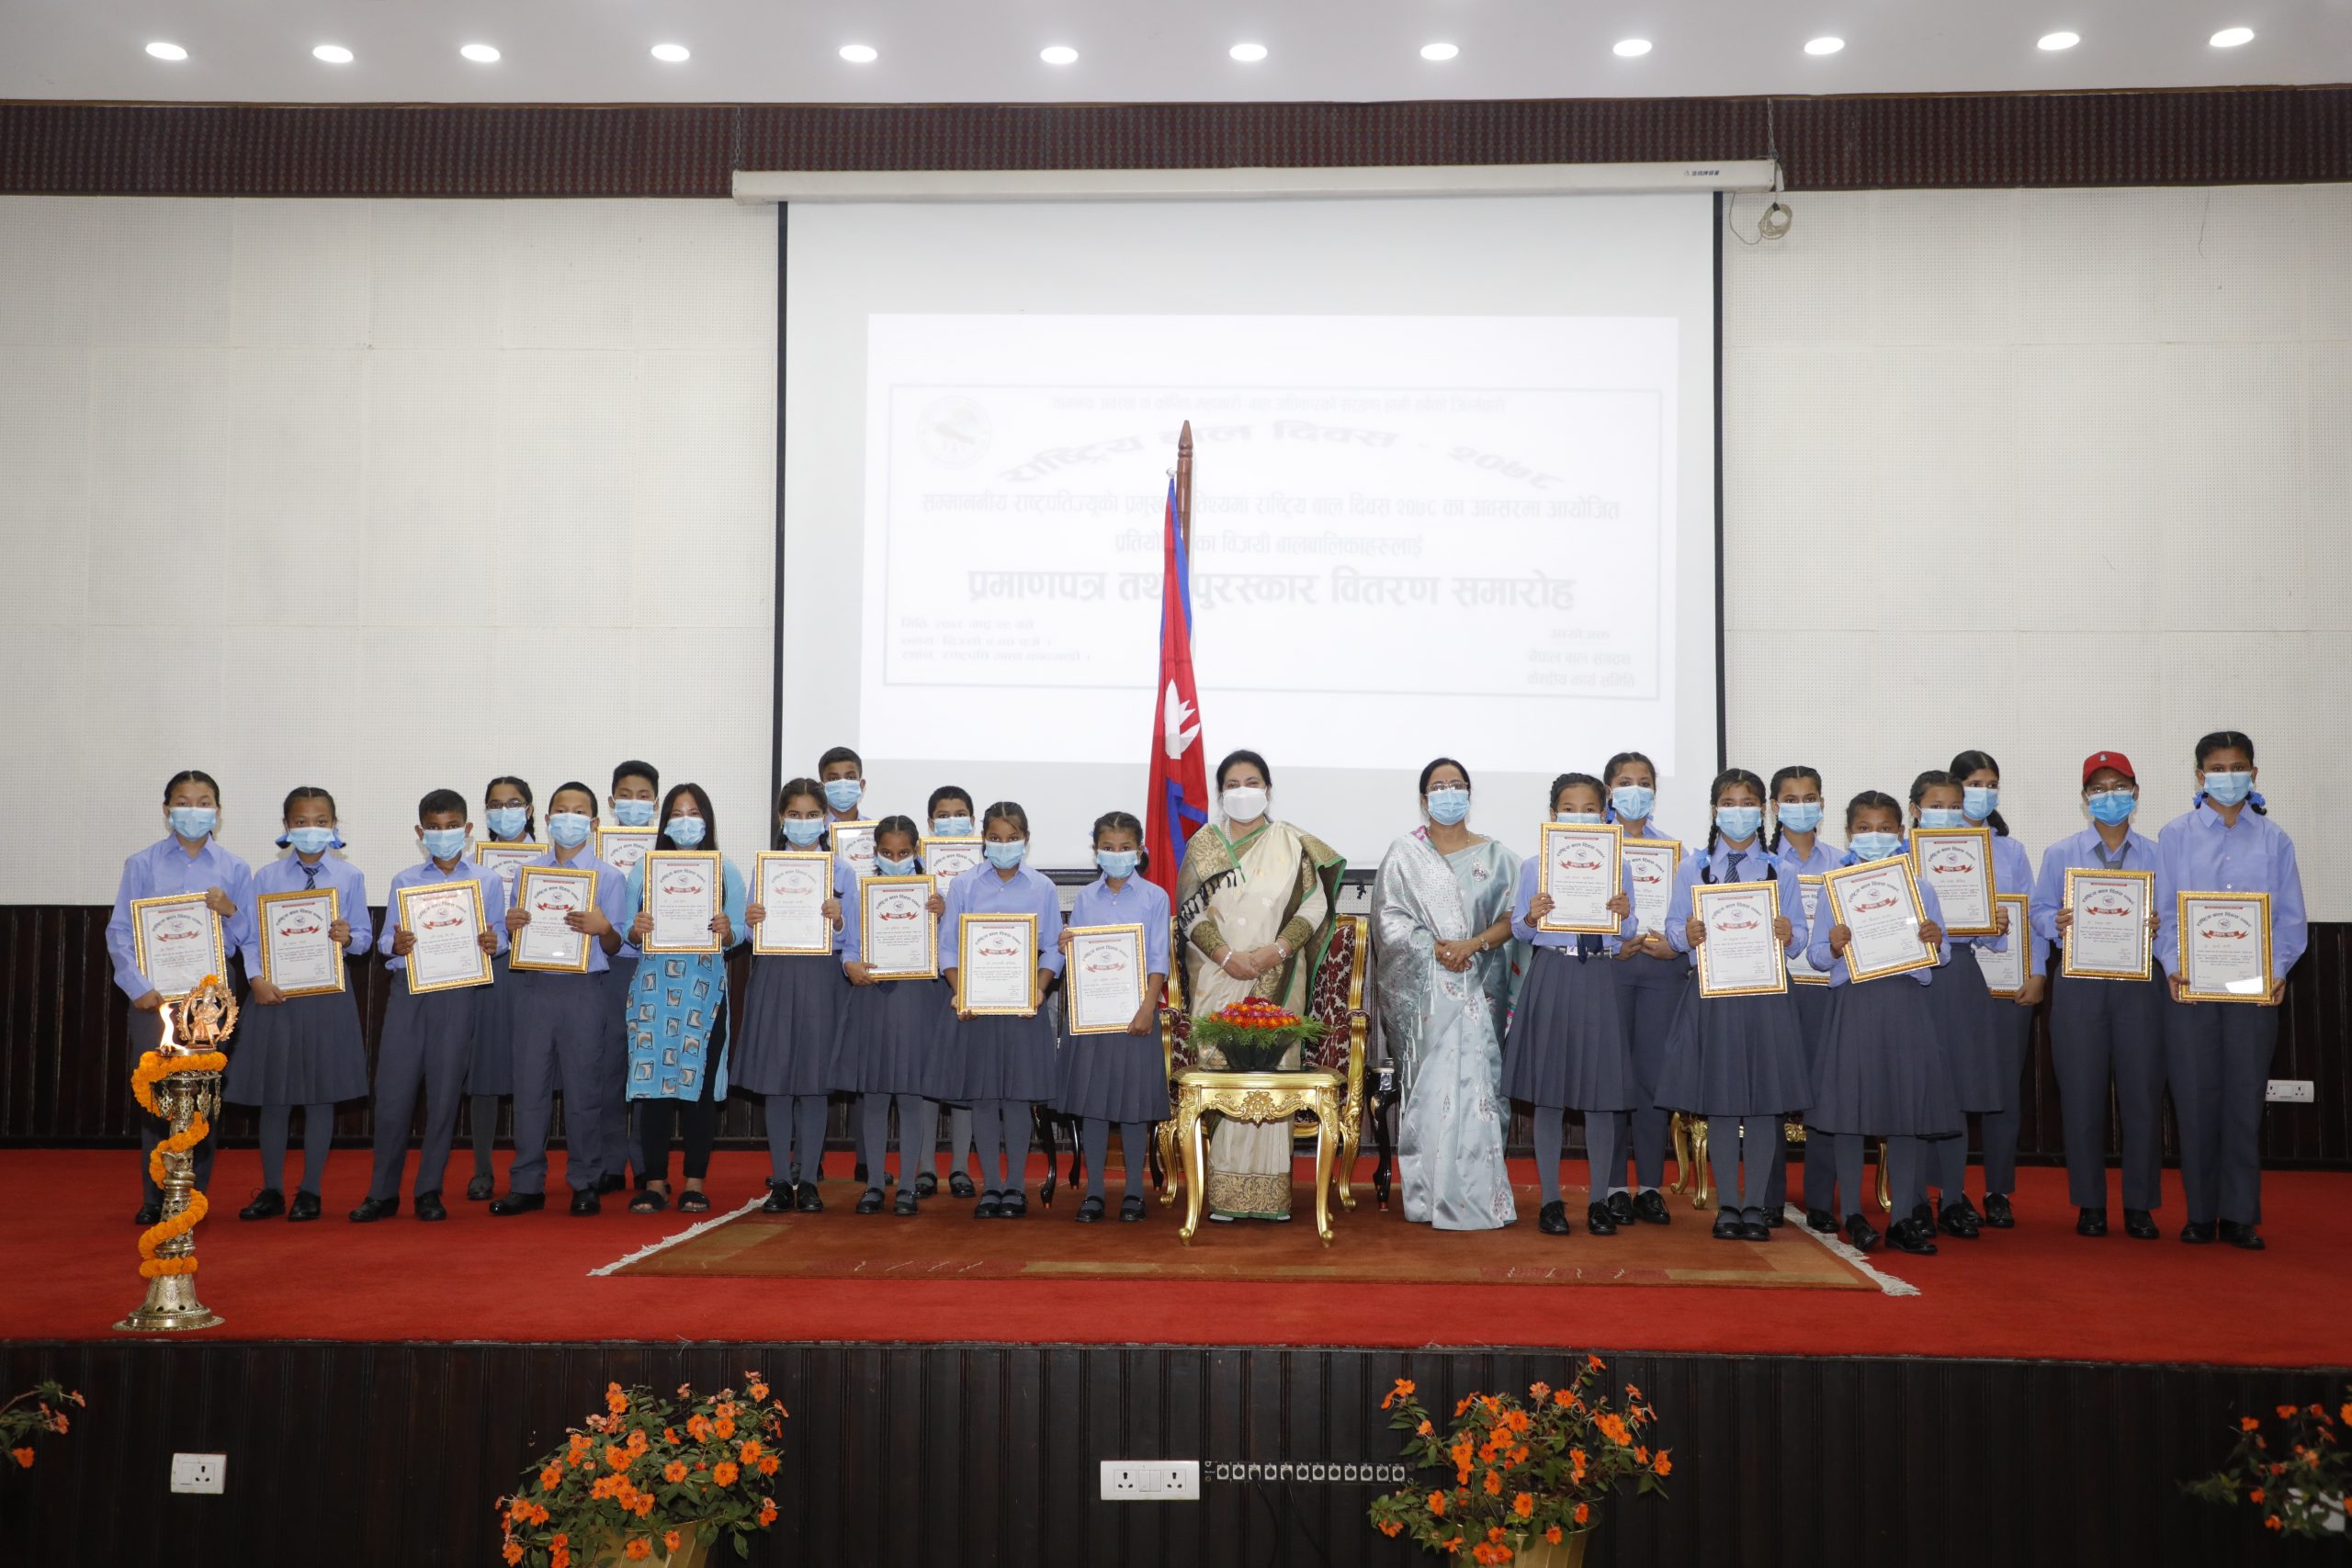 Winners of competition held for Children’s Day 2078